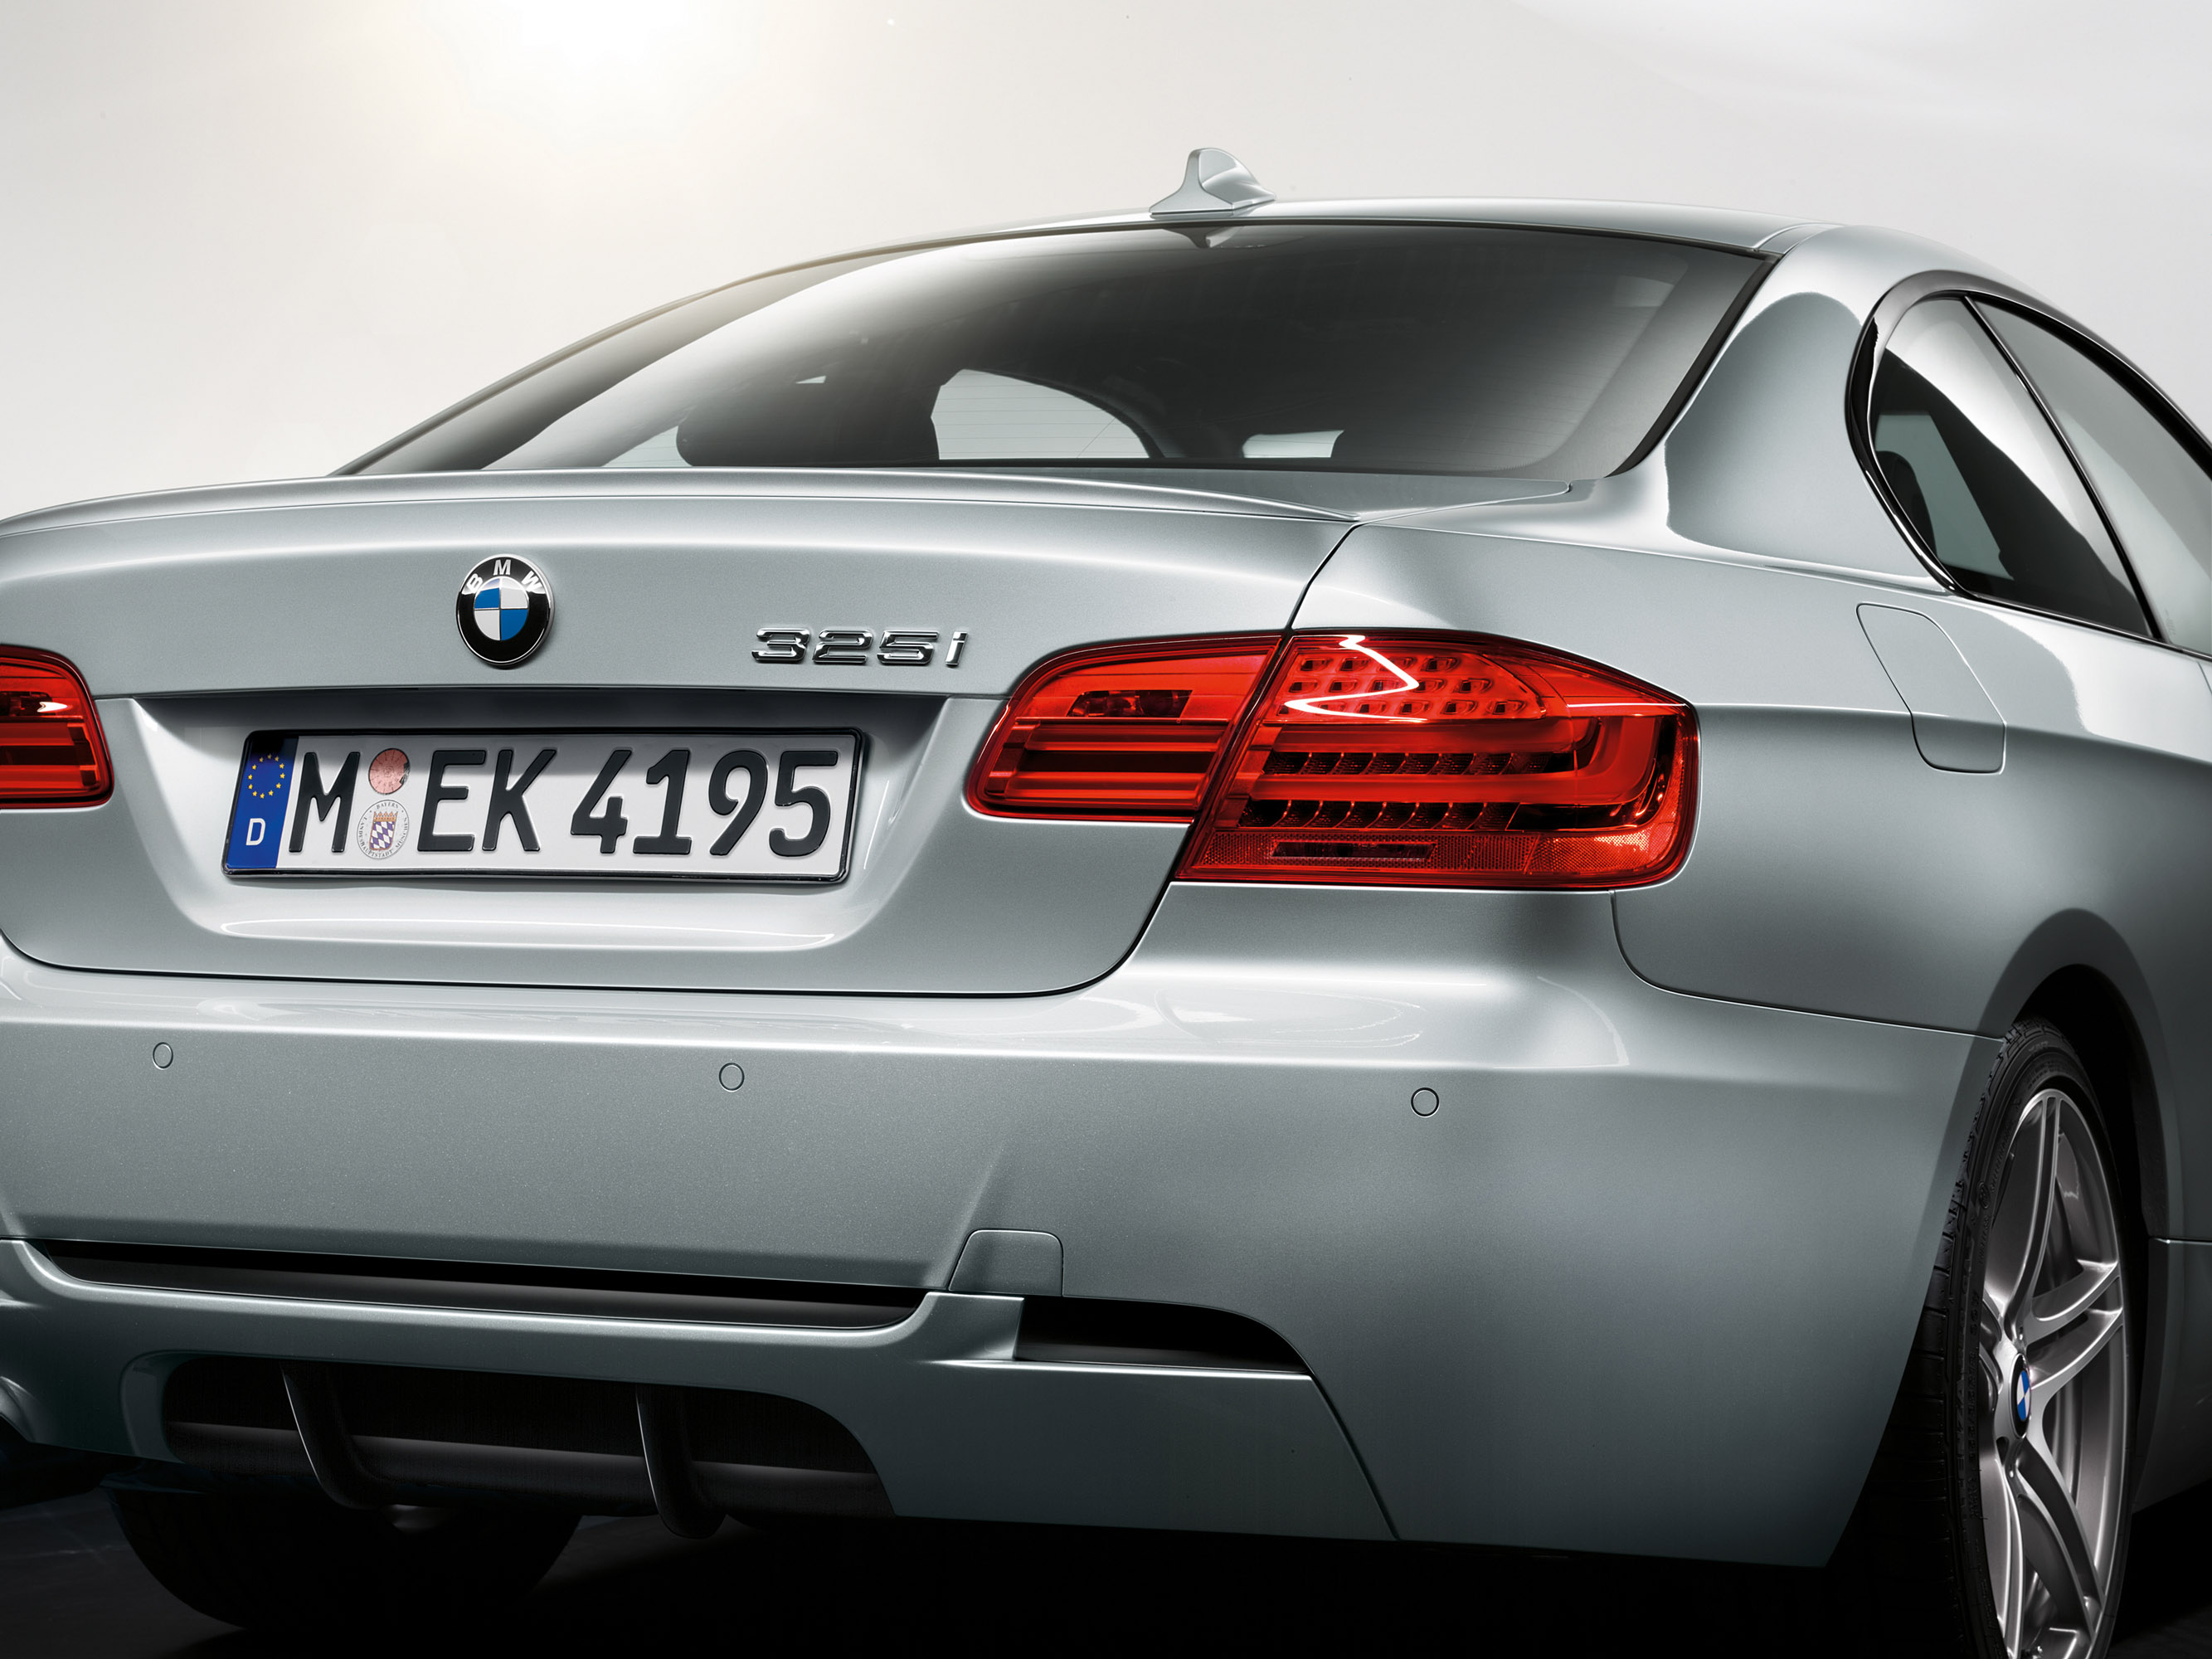 BMW 3-Series - Edition Exclusive and M Sport Edition